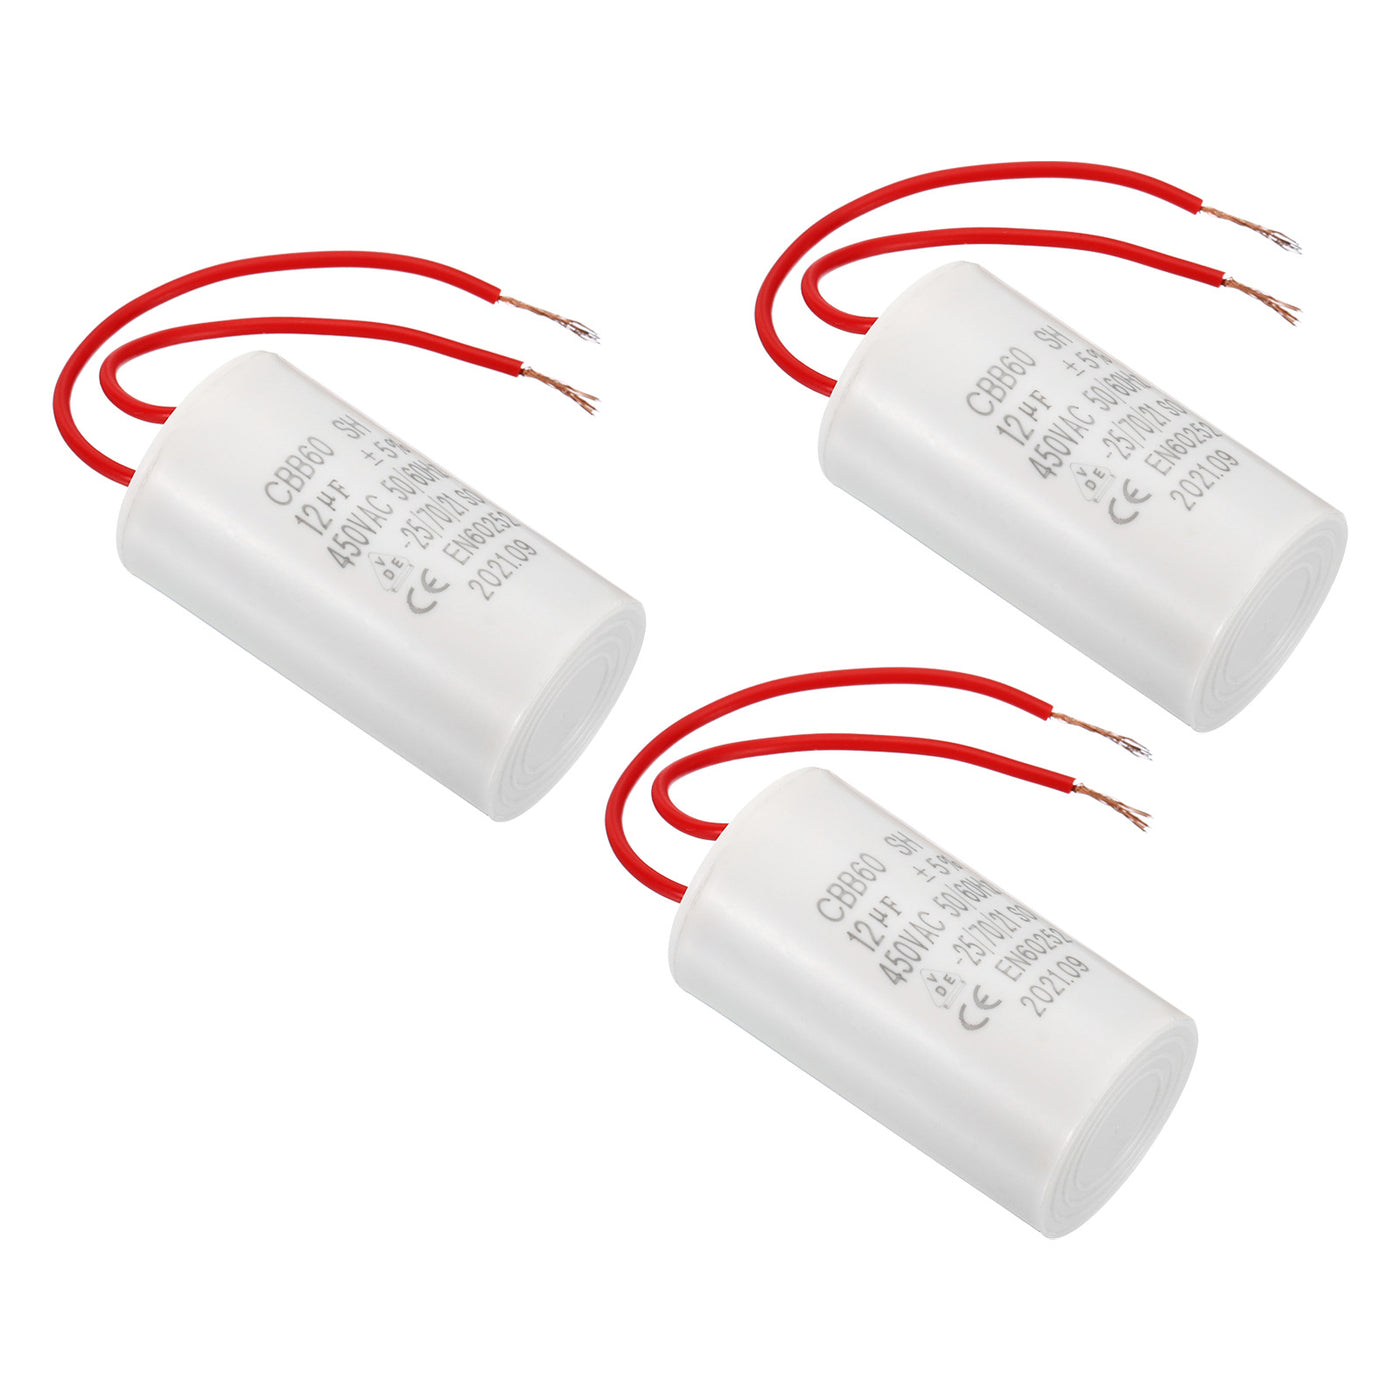 Harfington CBB60 12uF Run Capacitor,3Pcs AC450V 50/60Hz with 2 Wires 12cm for Water Pump